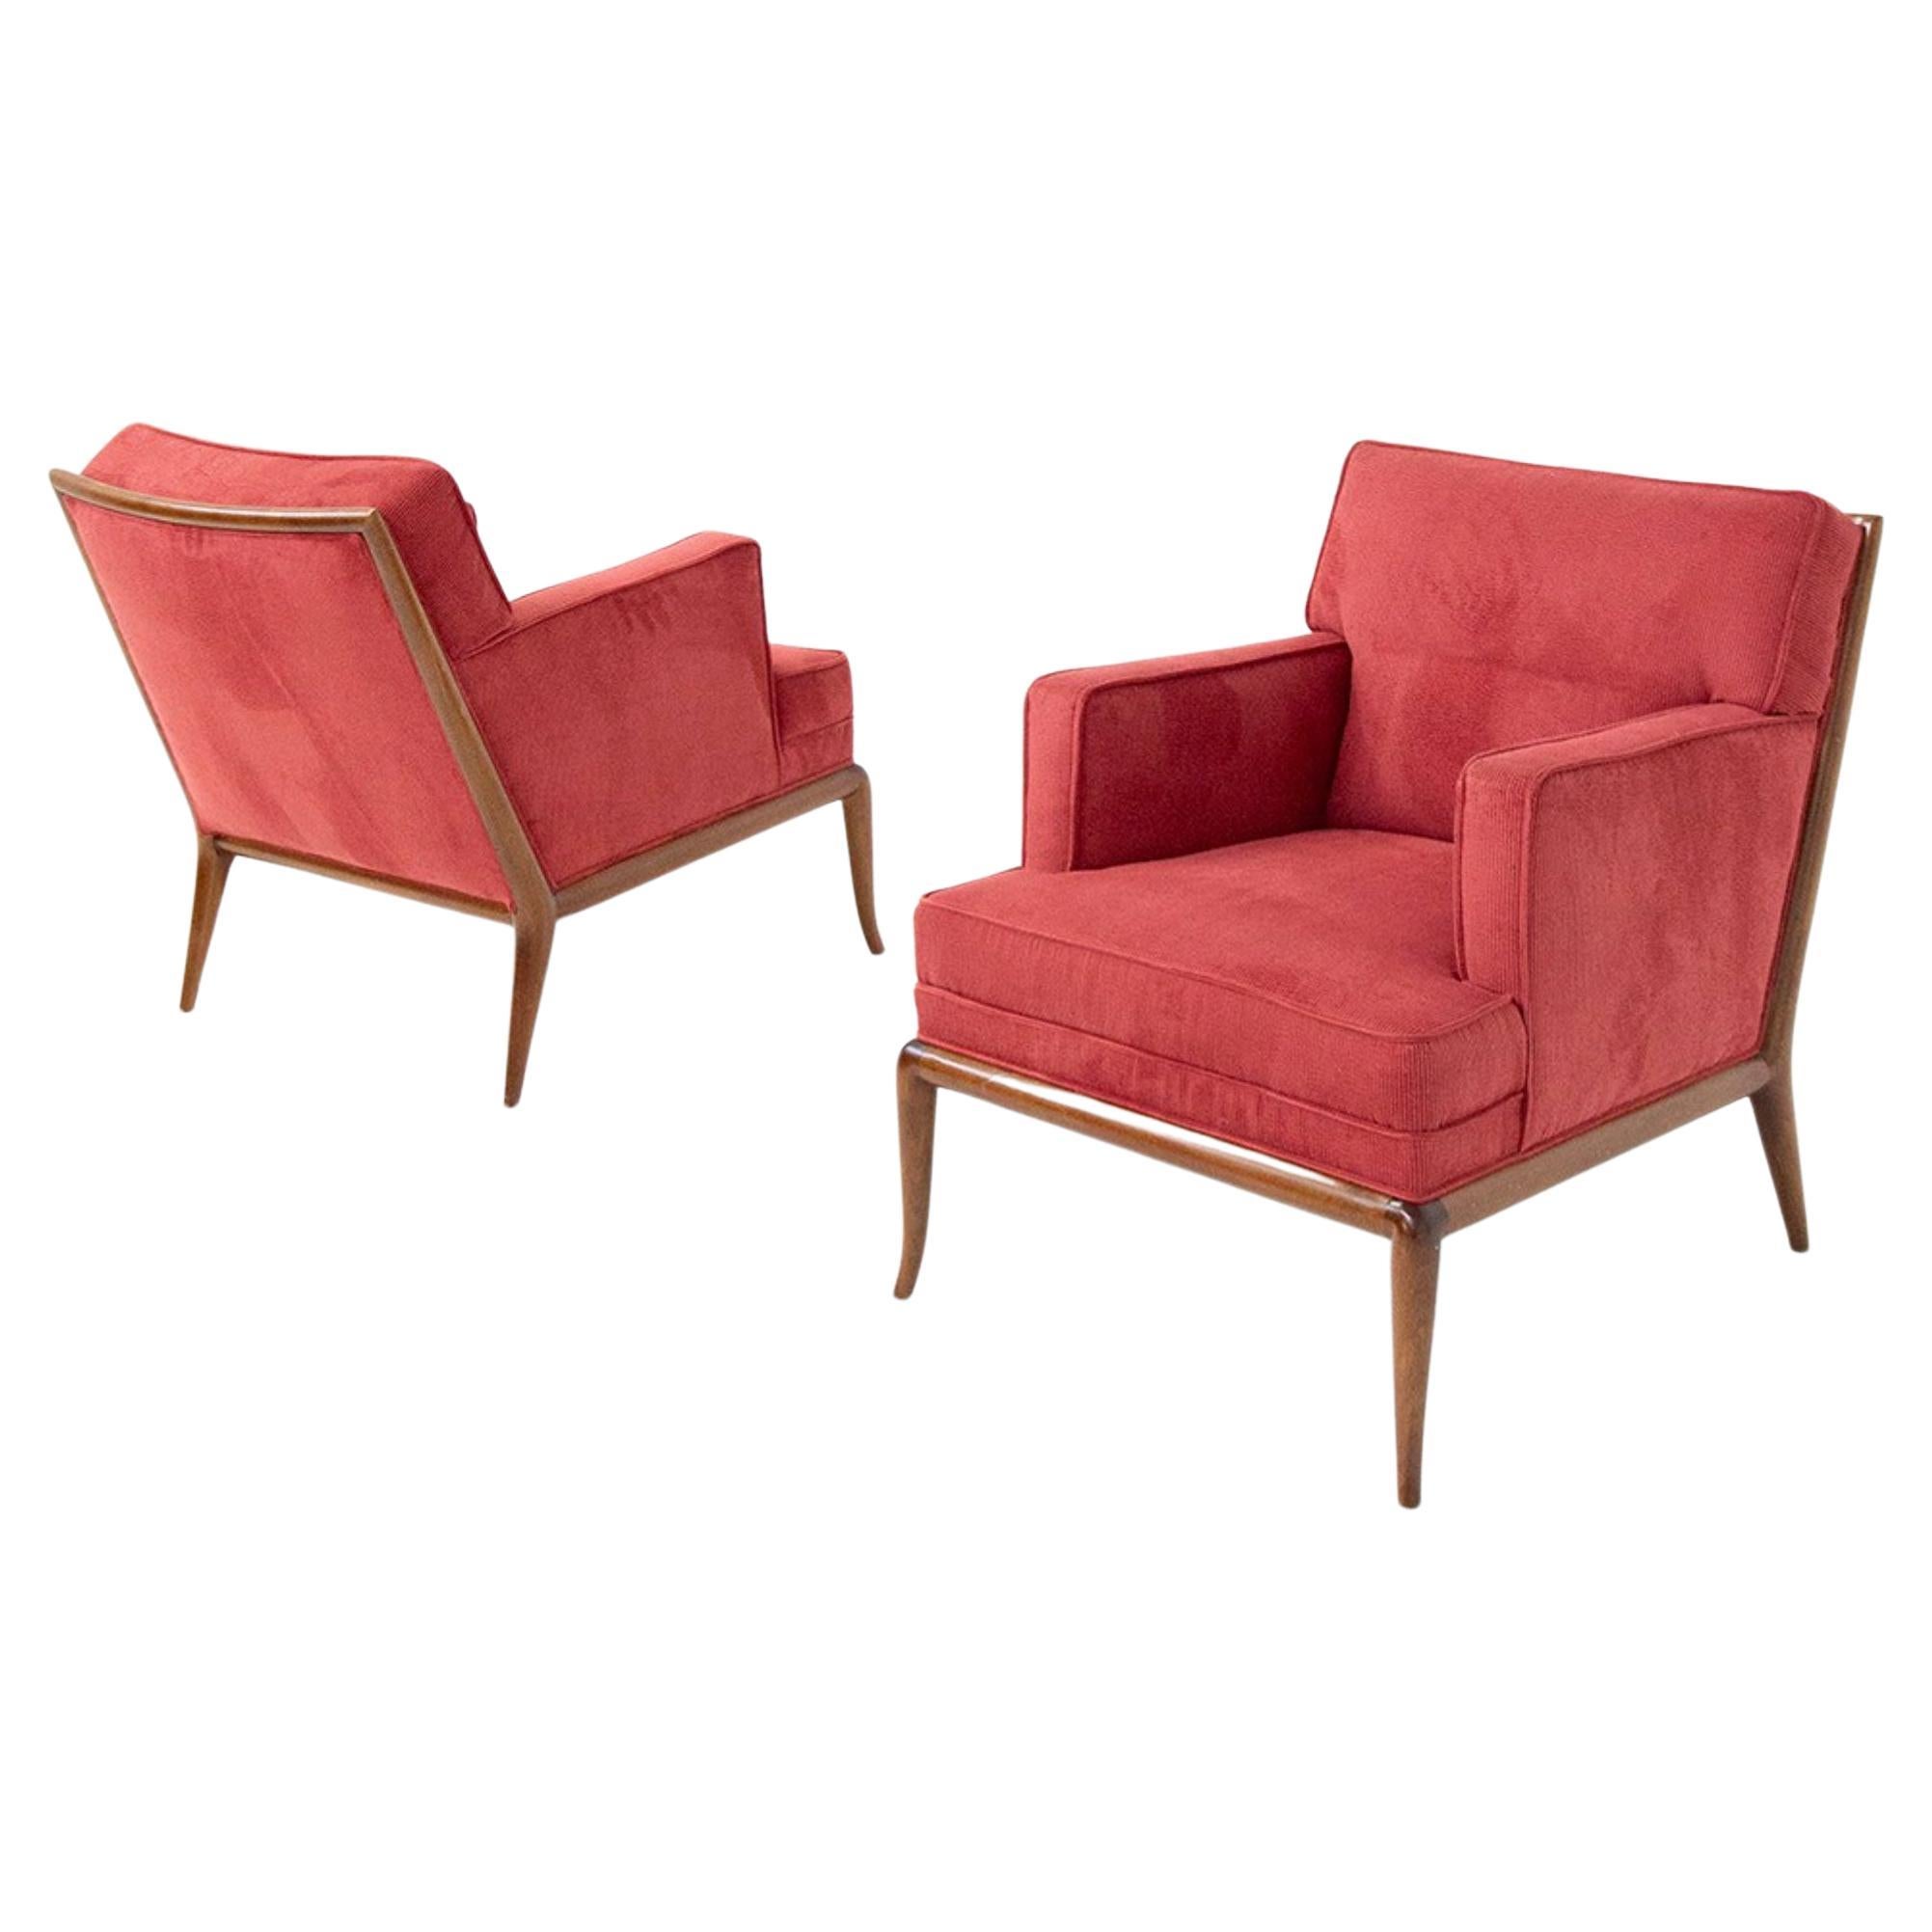 T.H Robsjohn-Gibbings armchairs for Widdicomb a Pair in walnut USA, 1950 For Sale